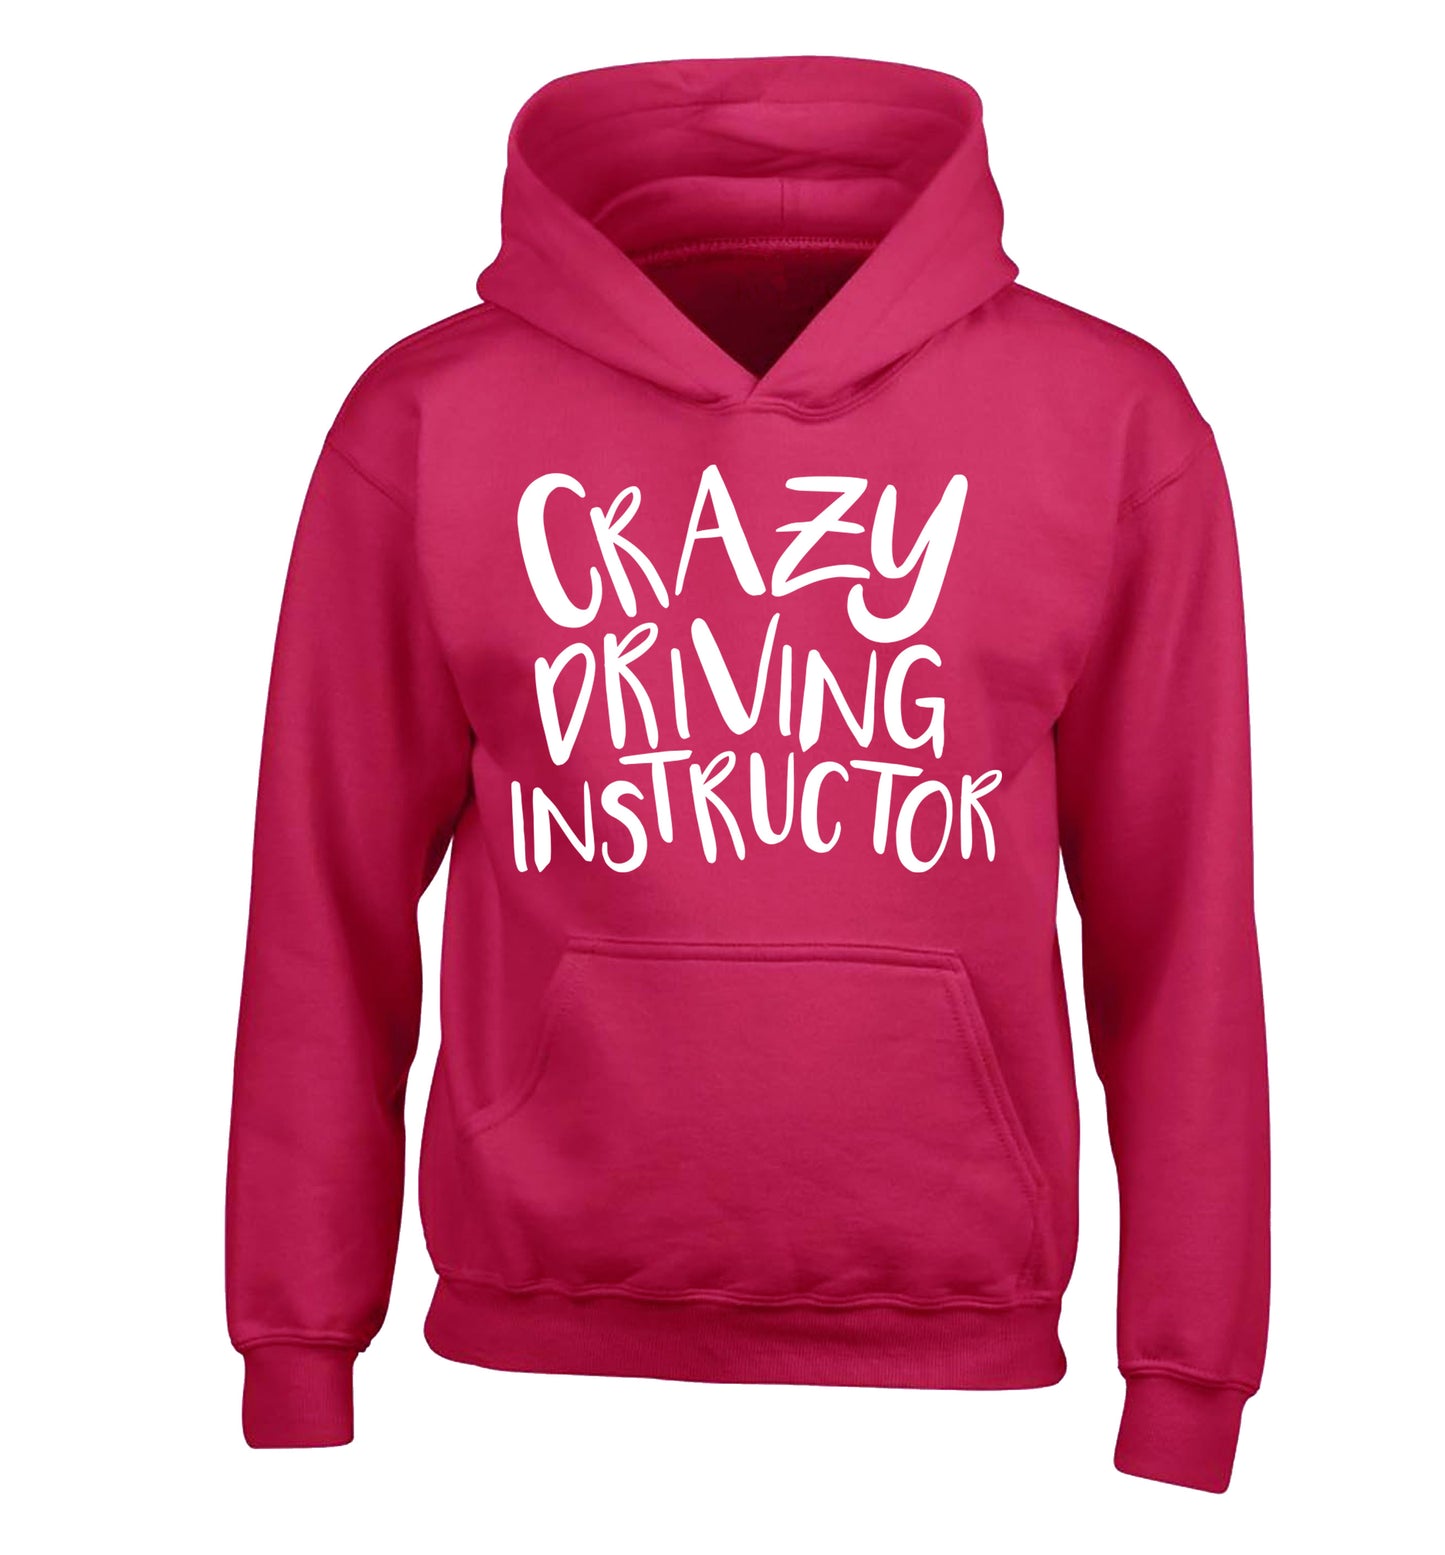 Crazy driving instructor children's pink hoodie 12-13 Years